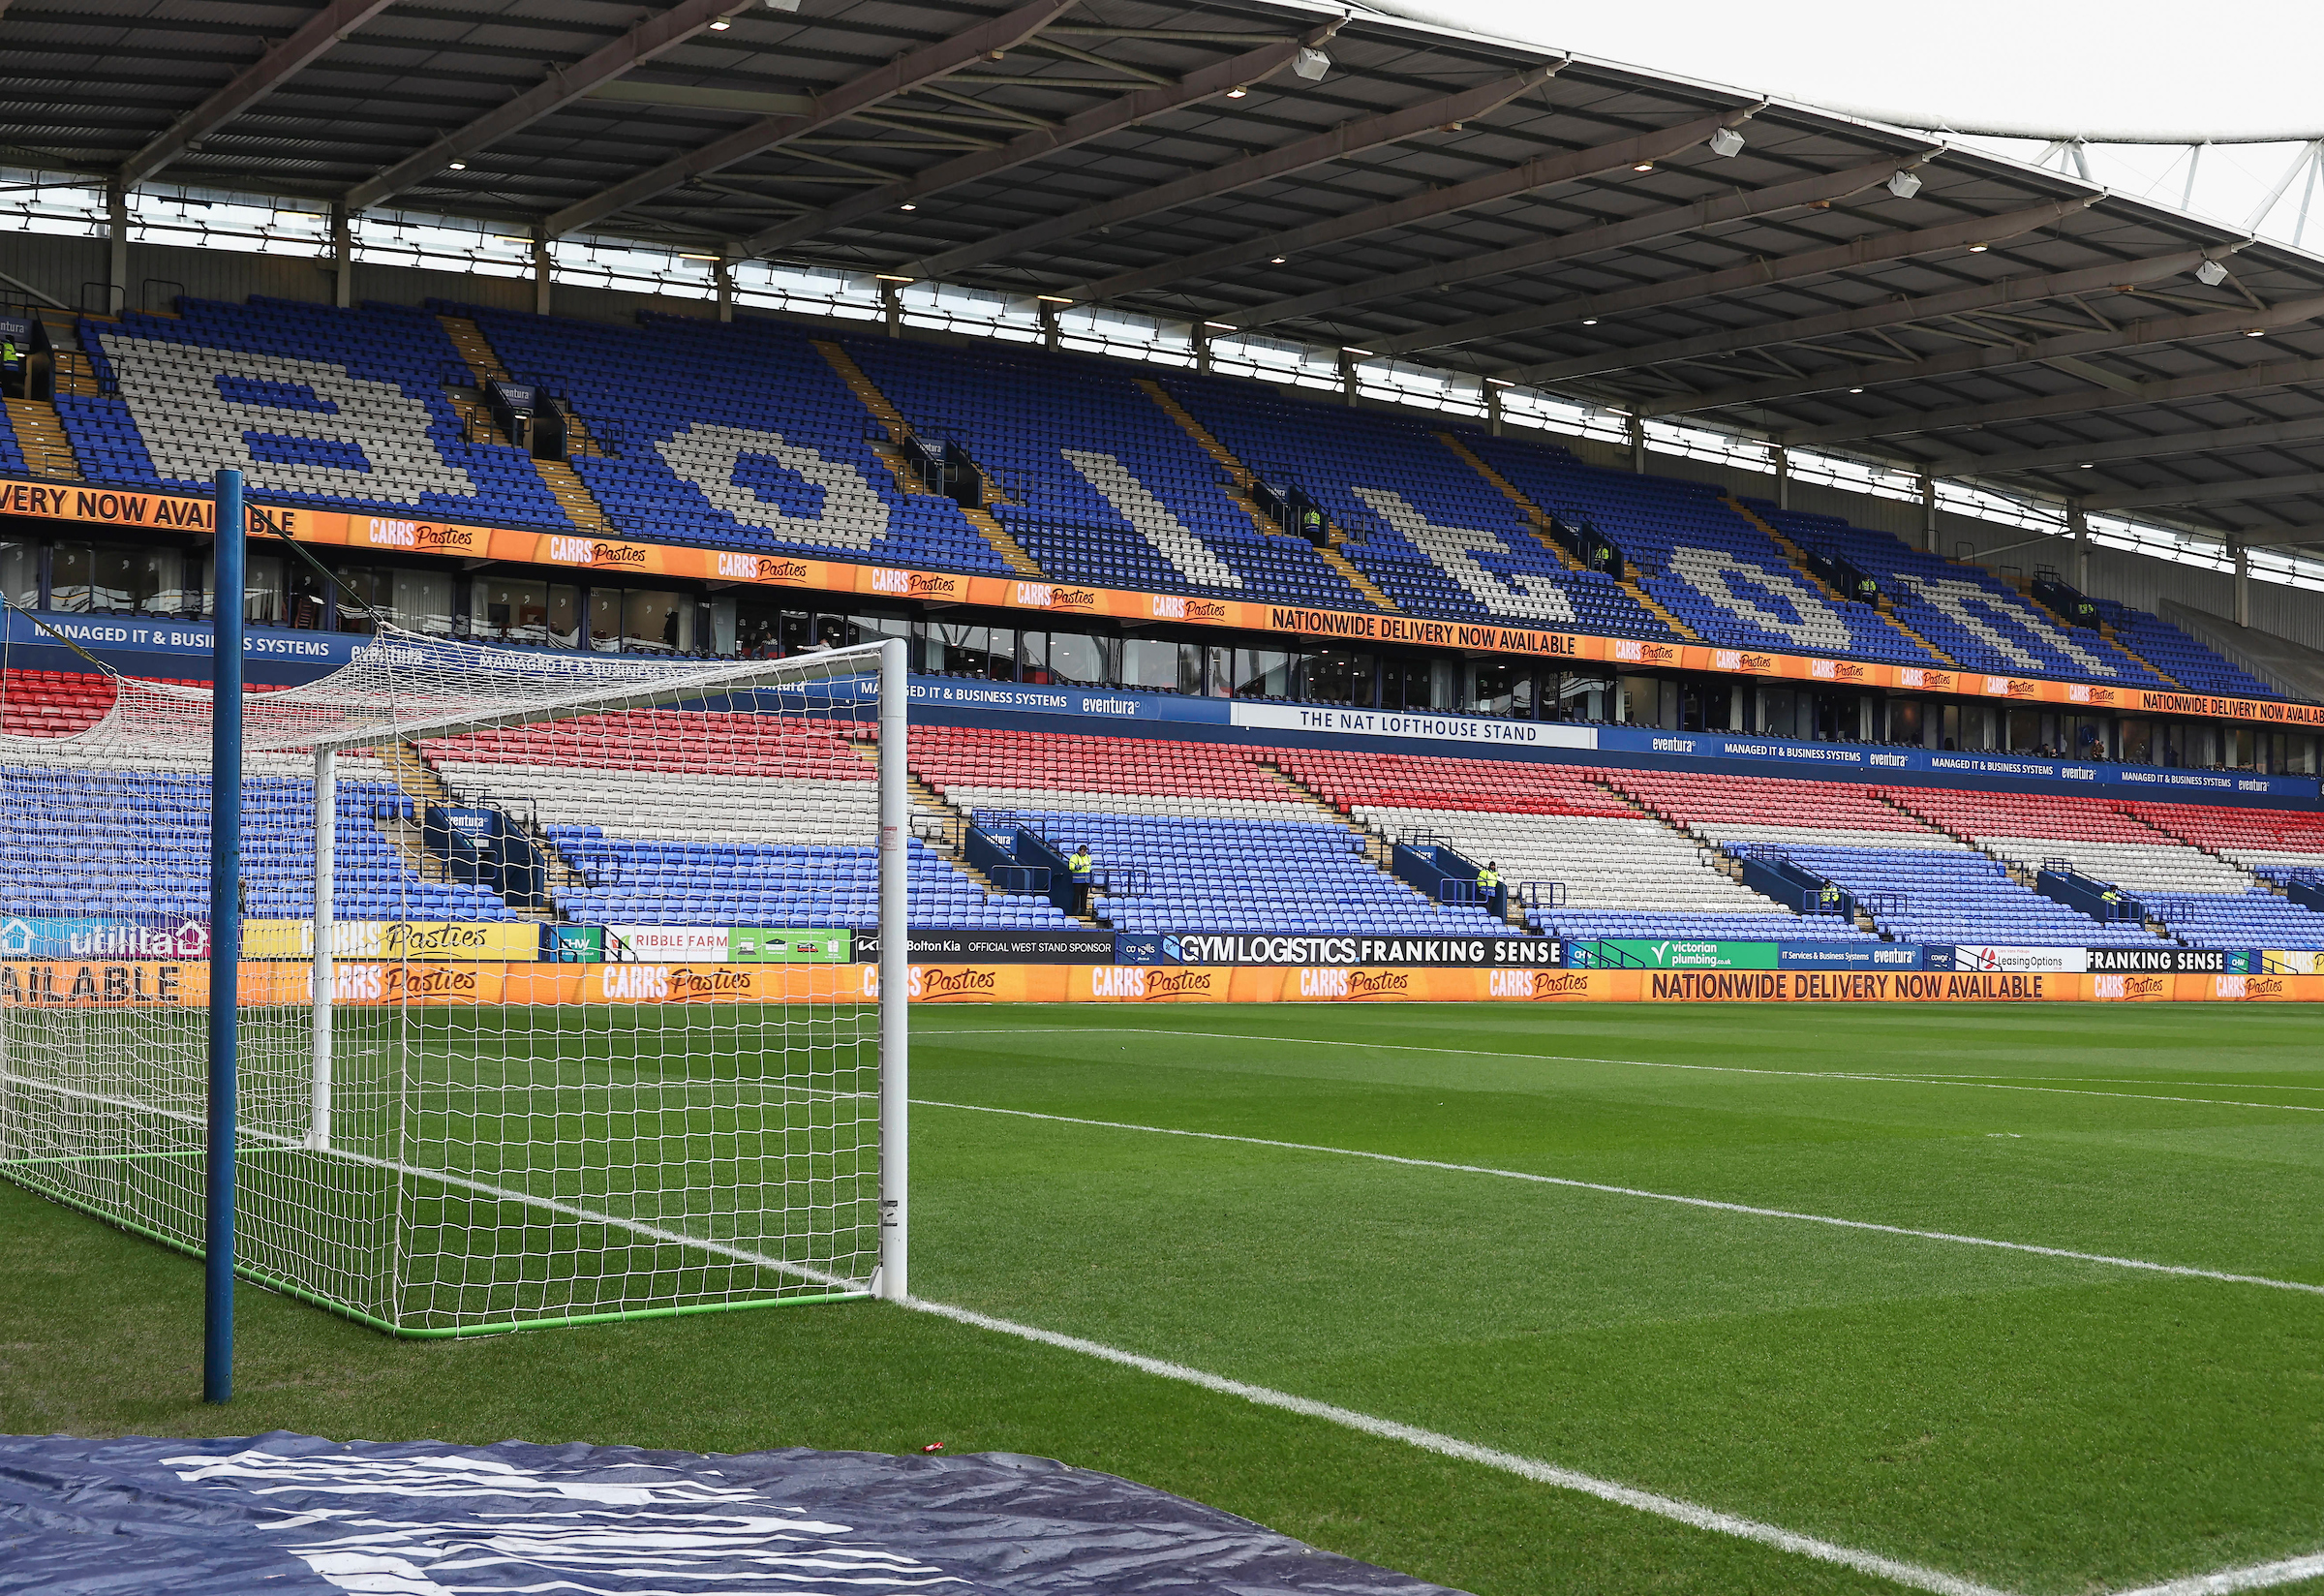 Bolton Wanderers v Wycombe: How to watch on TV, live stream